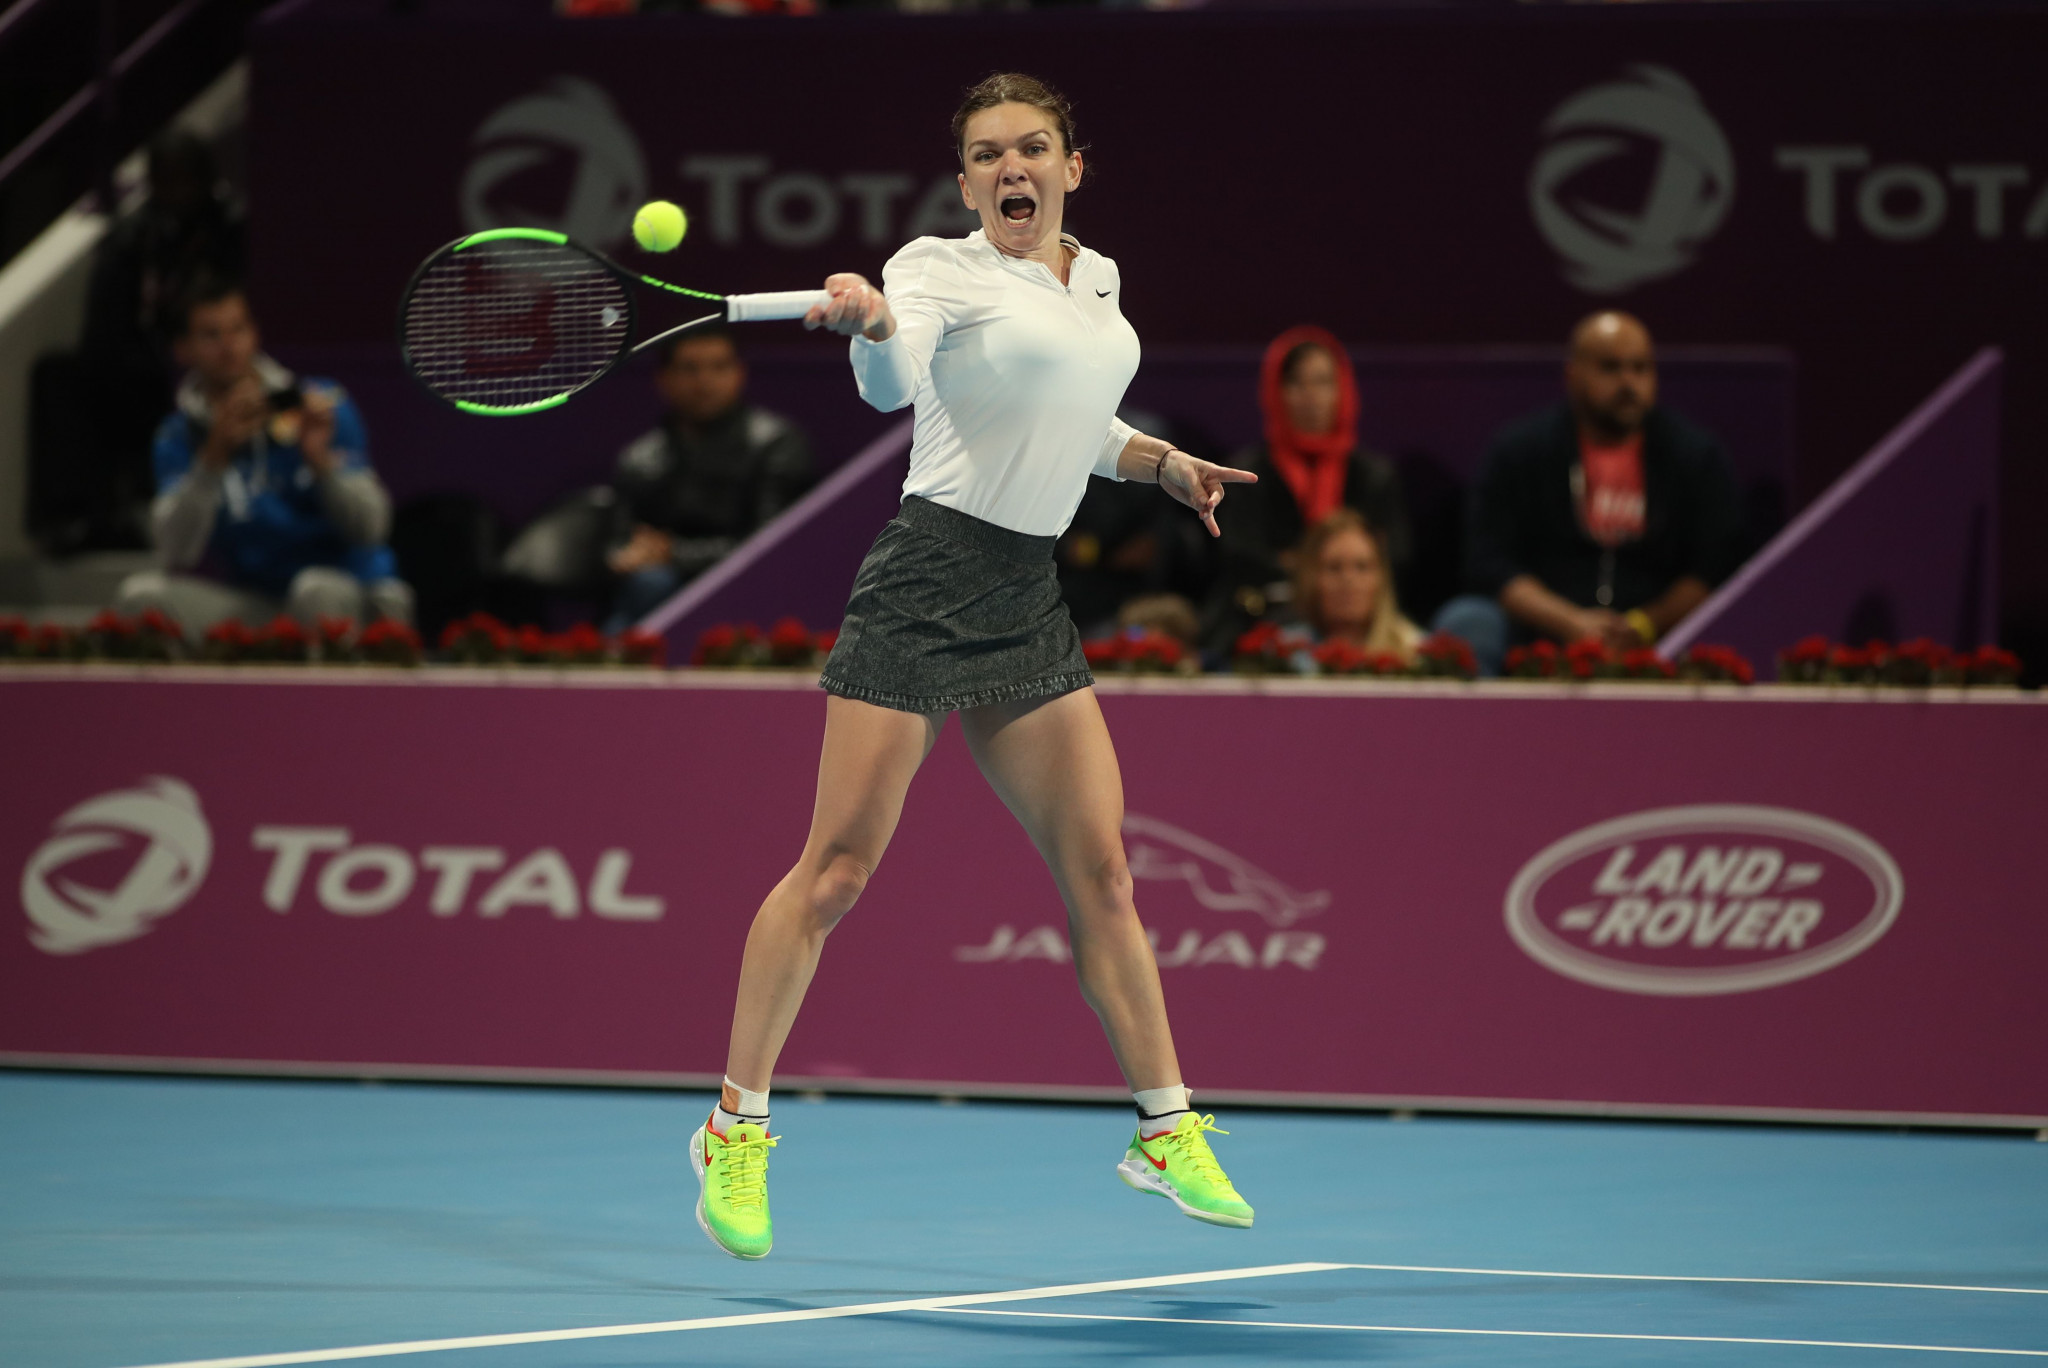 Halep and Mertens to meet in final of WTA Qatar Open 